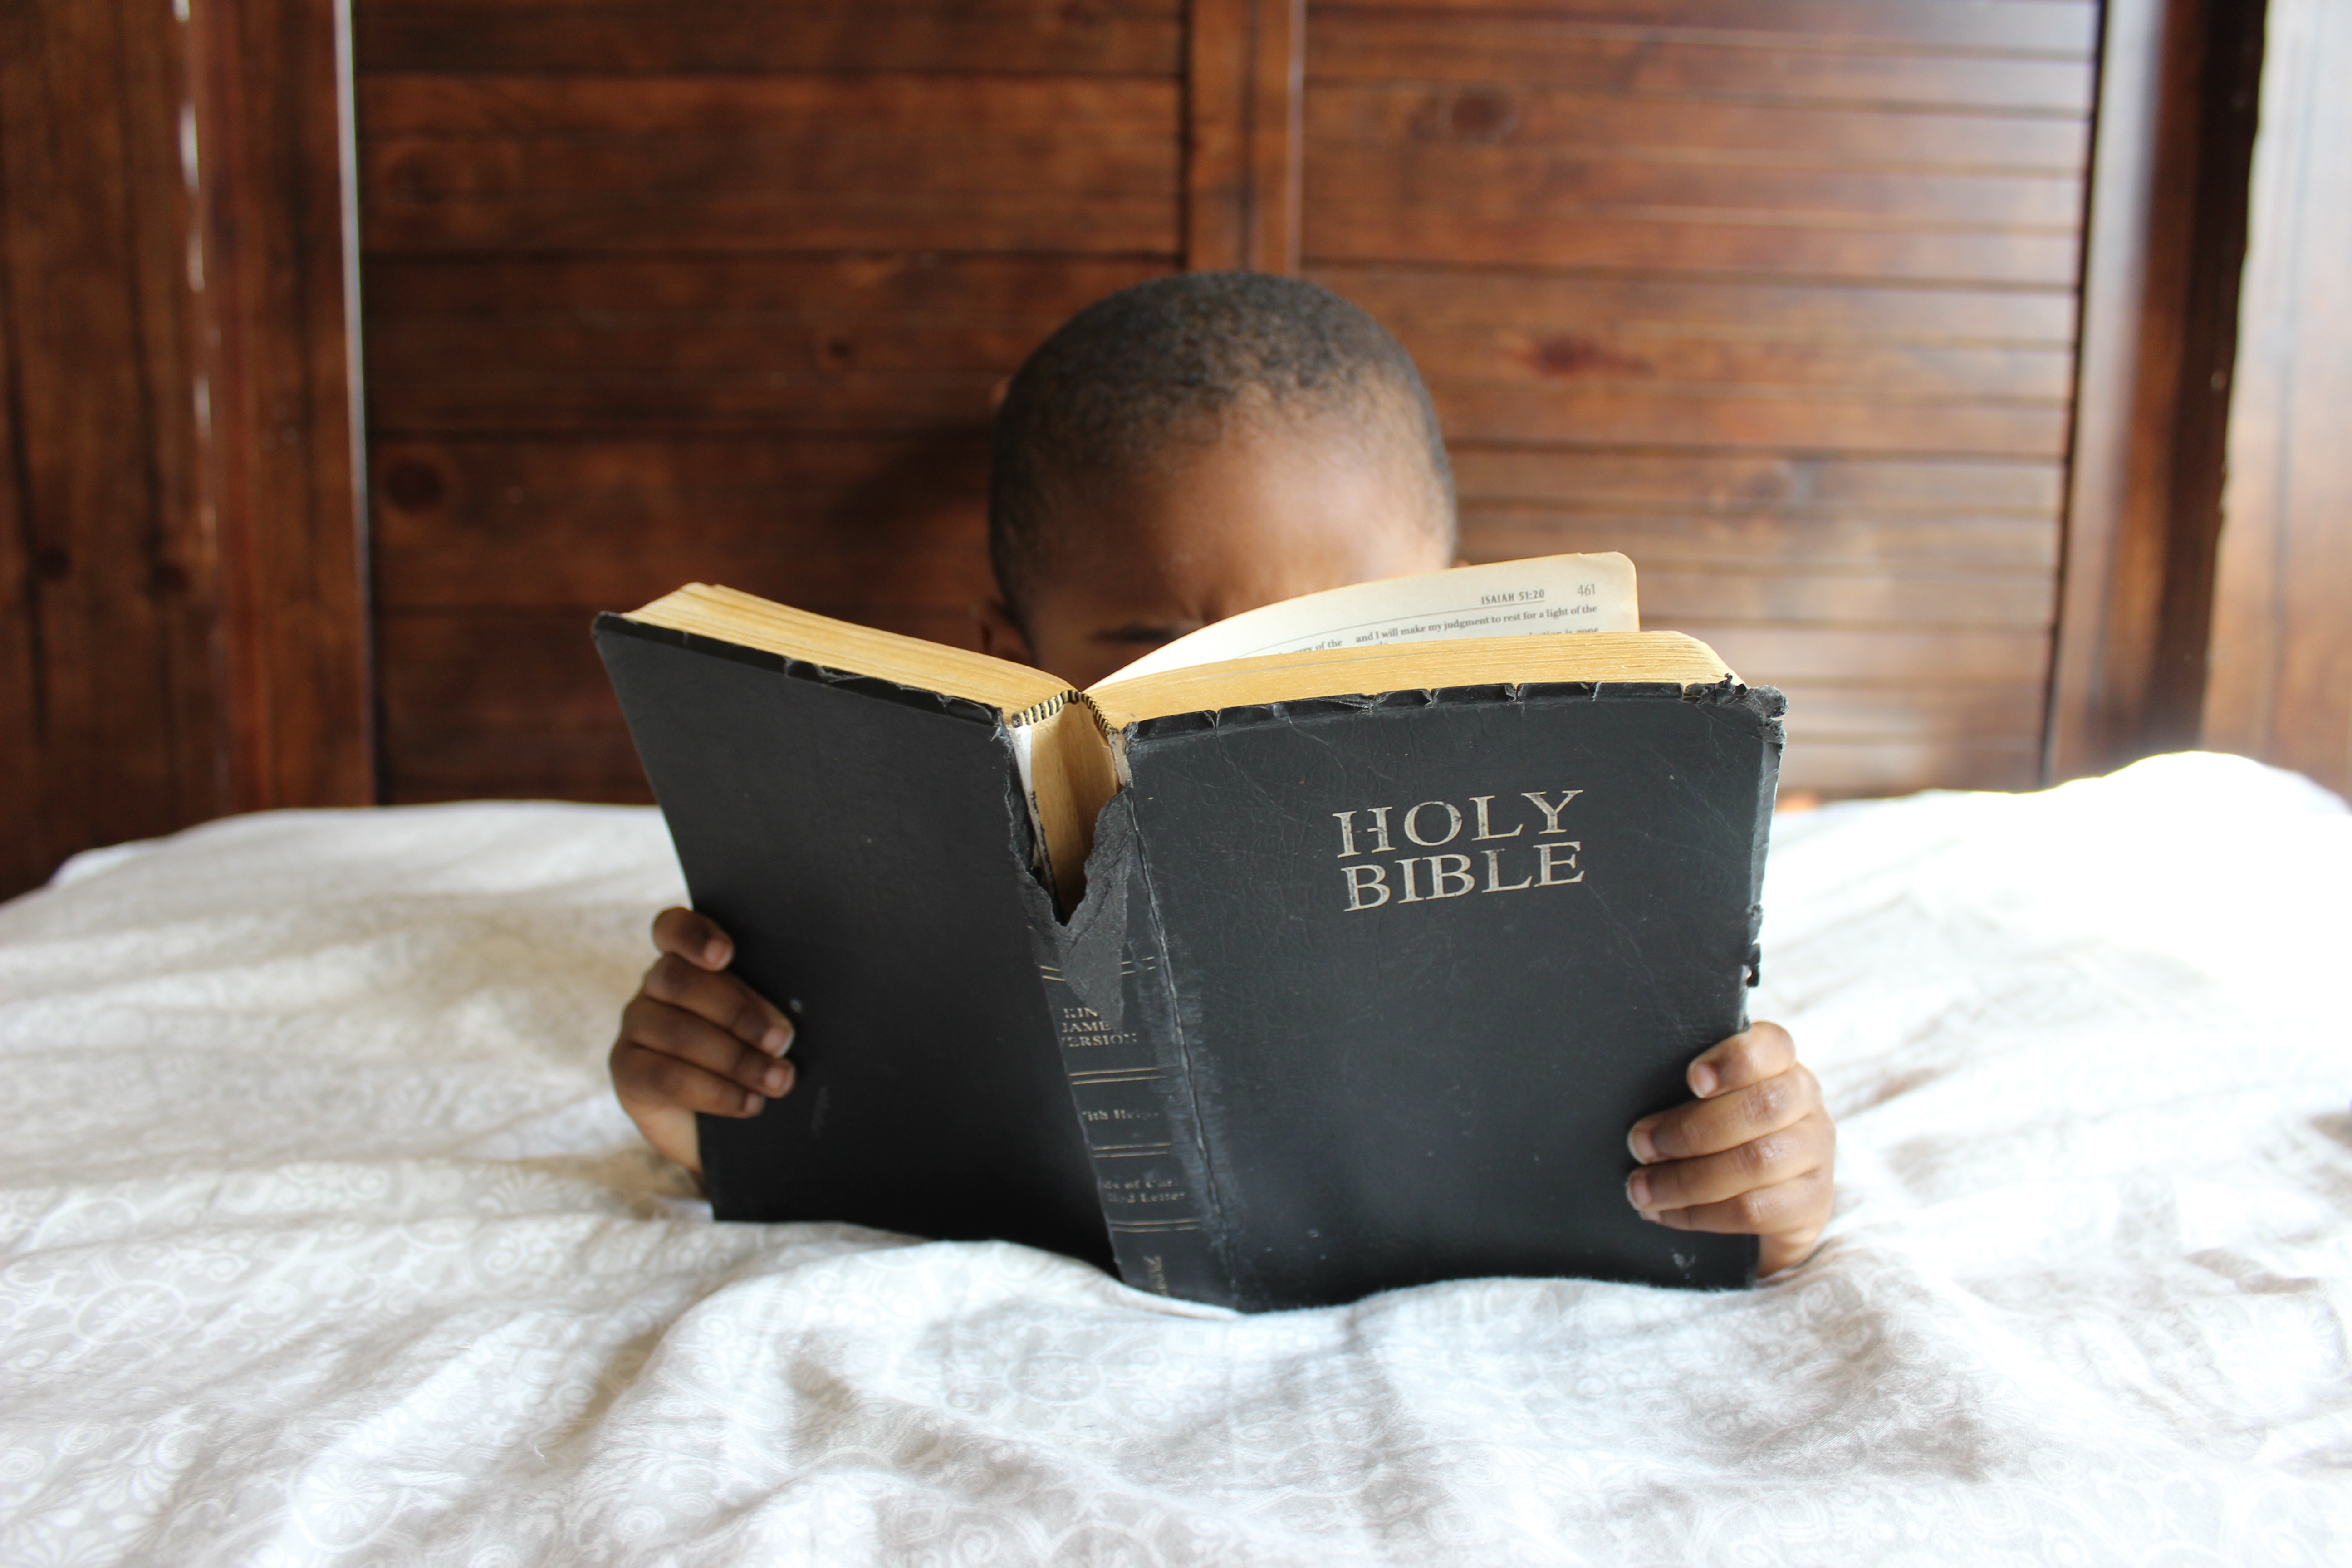 Fears I Have For My Kids Growing Up in a Christian Home